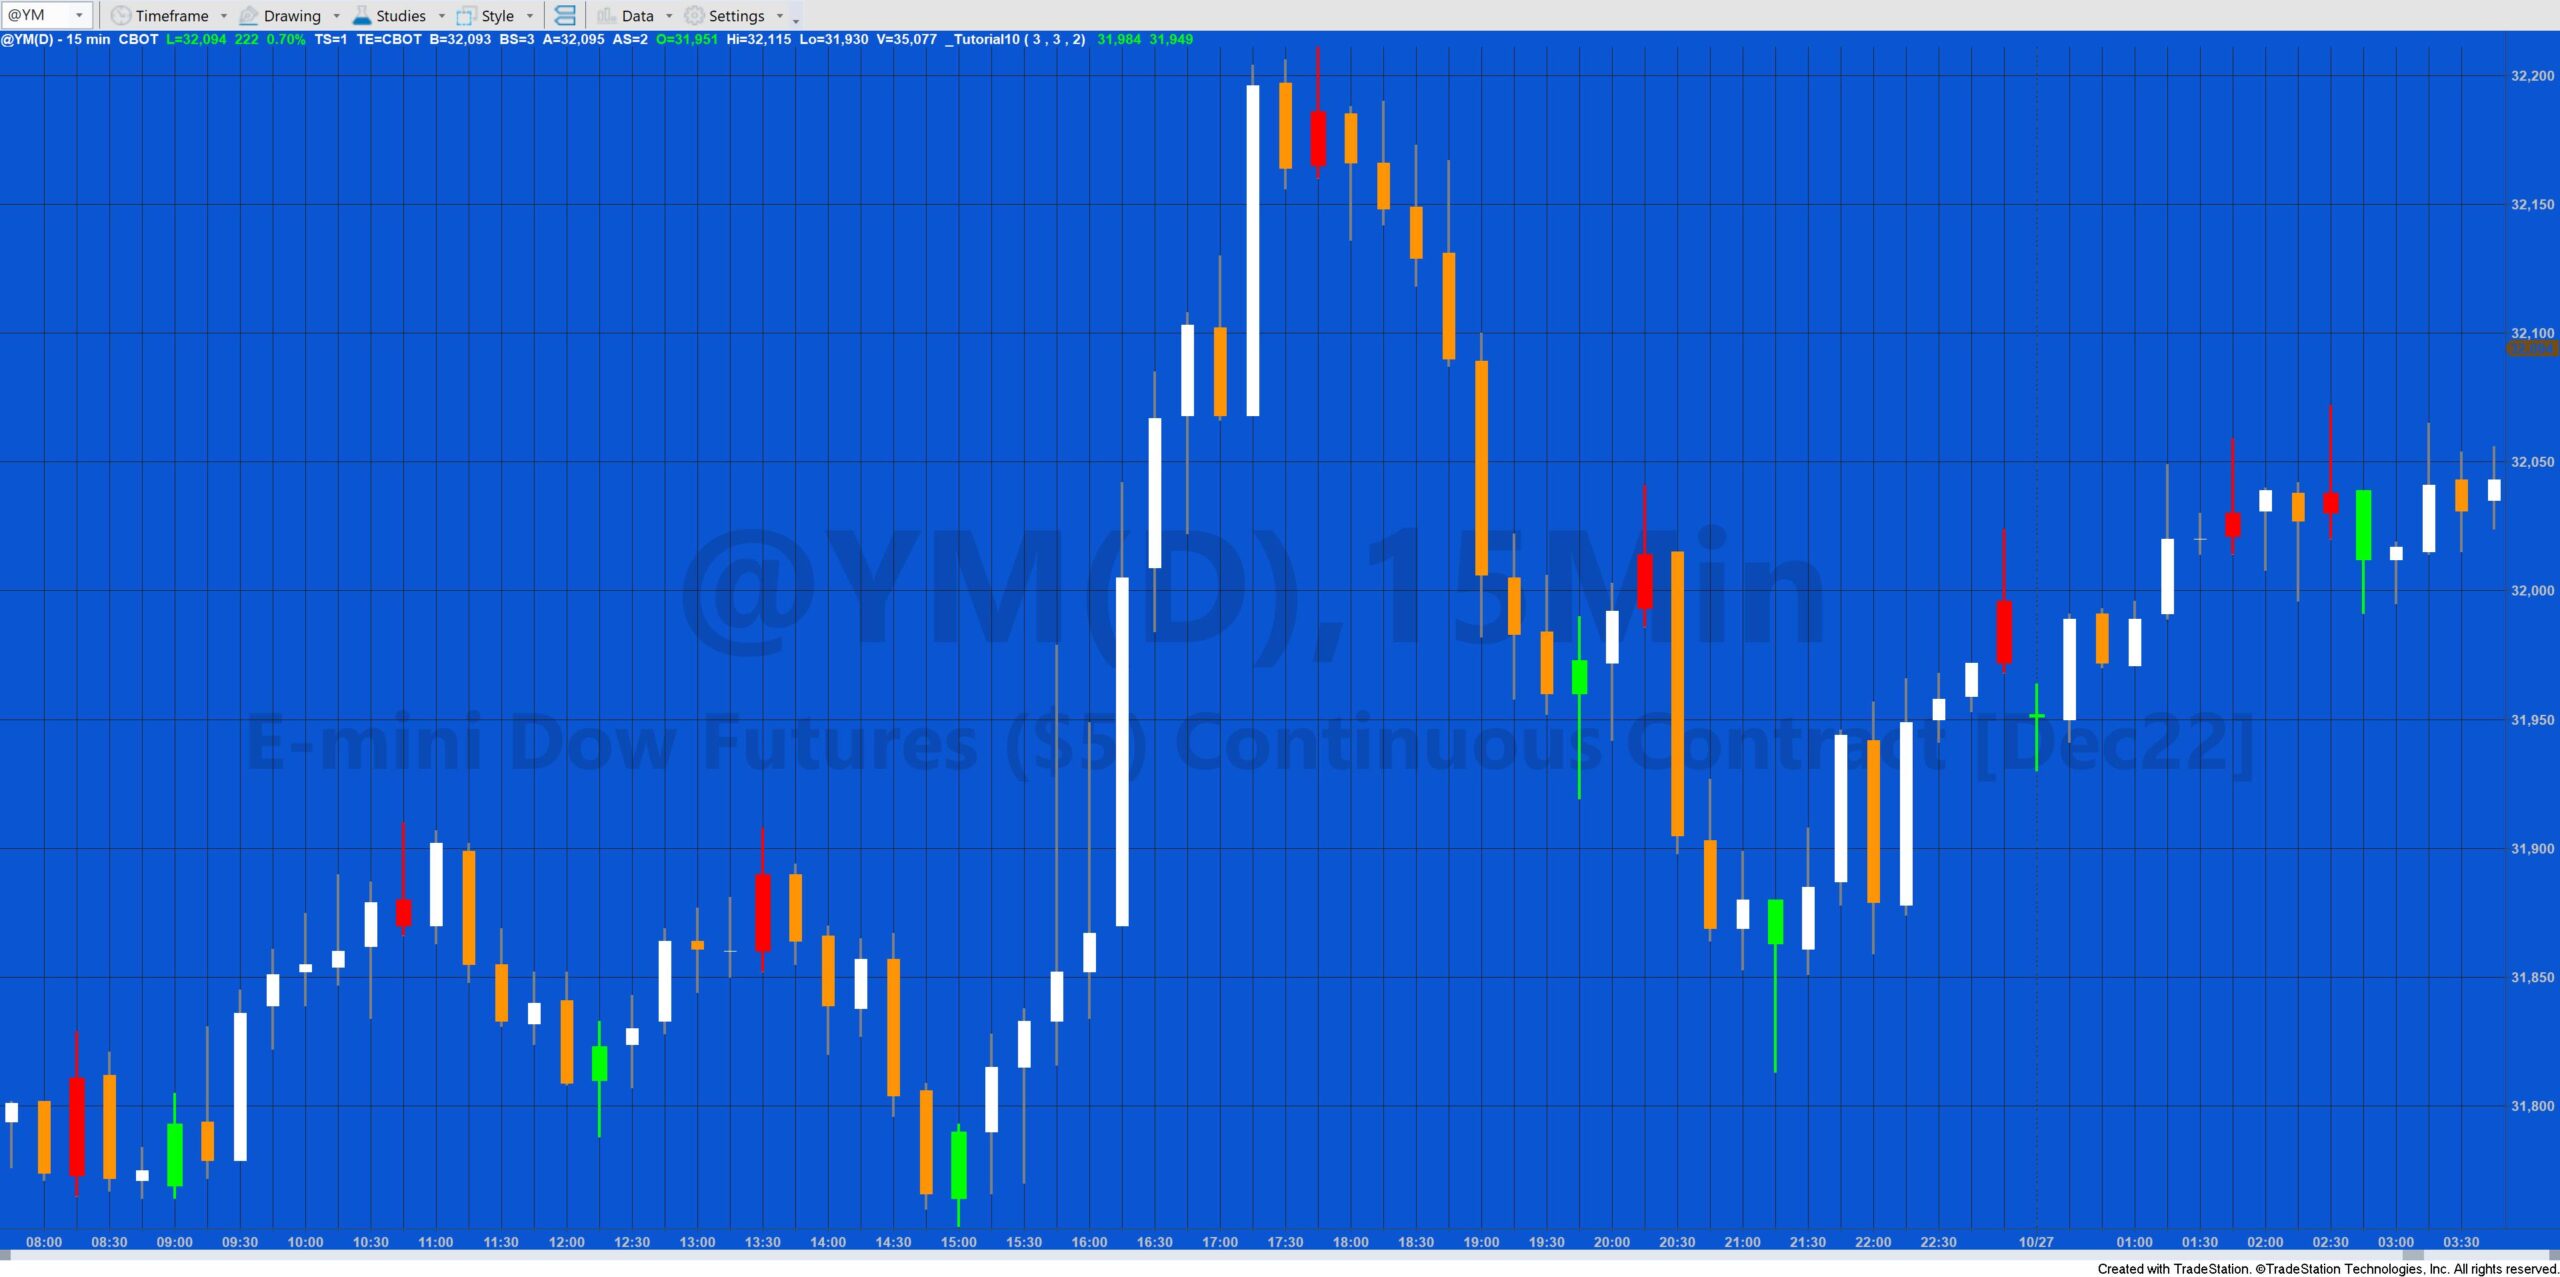 Tutorial 10 applied to a 15 minute @YM chart in Tradestation 10